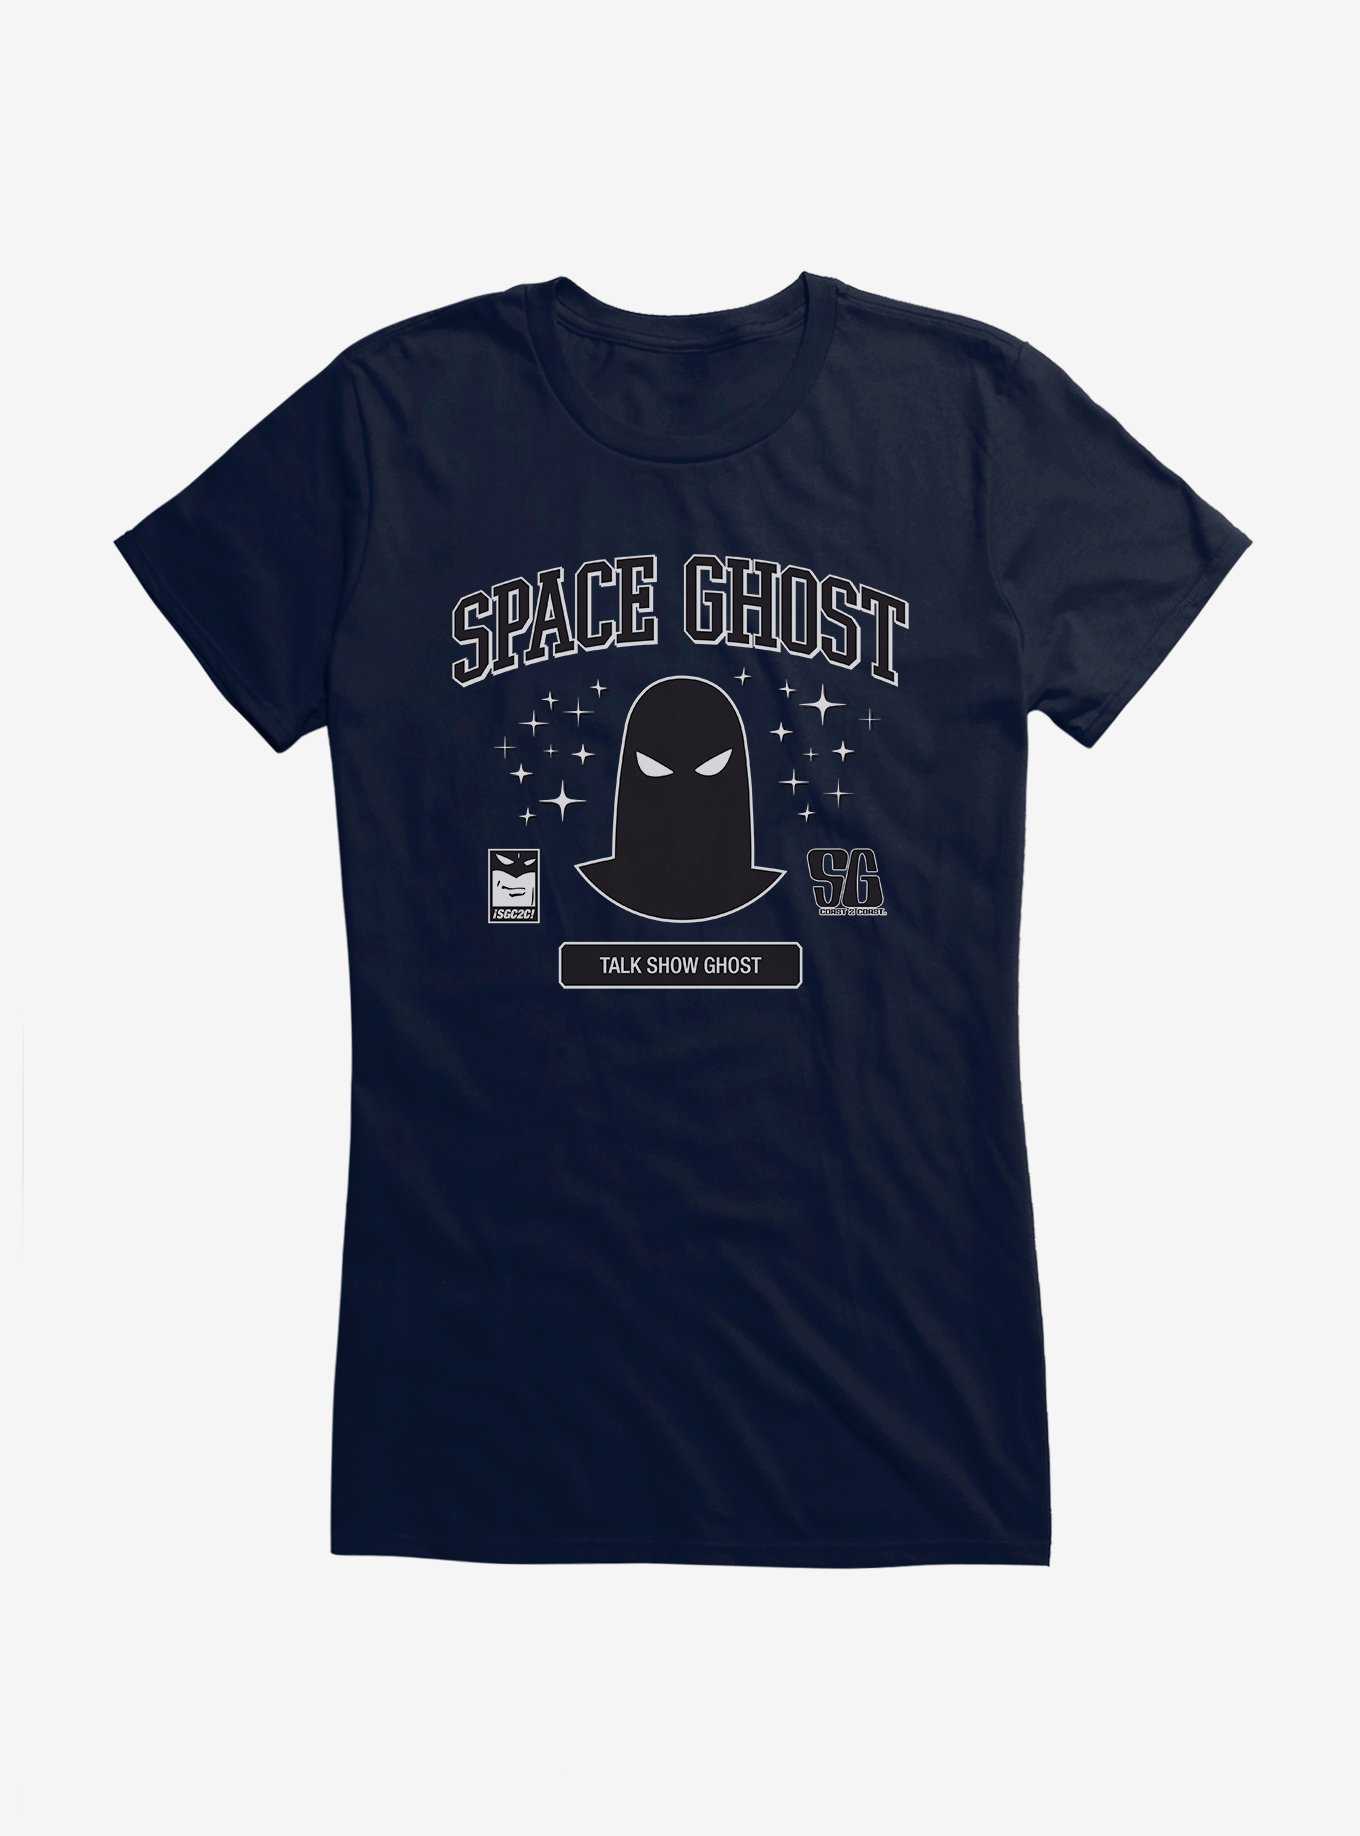 Space Ghost Talk Show Ghost Girls T-Shirt, , hi-res